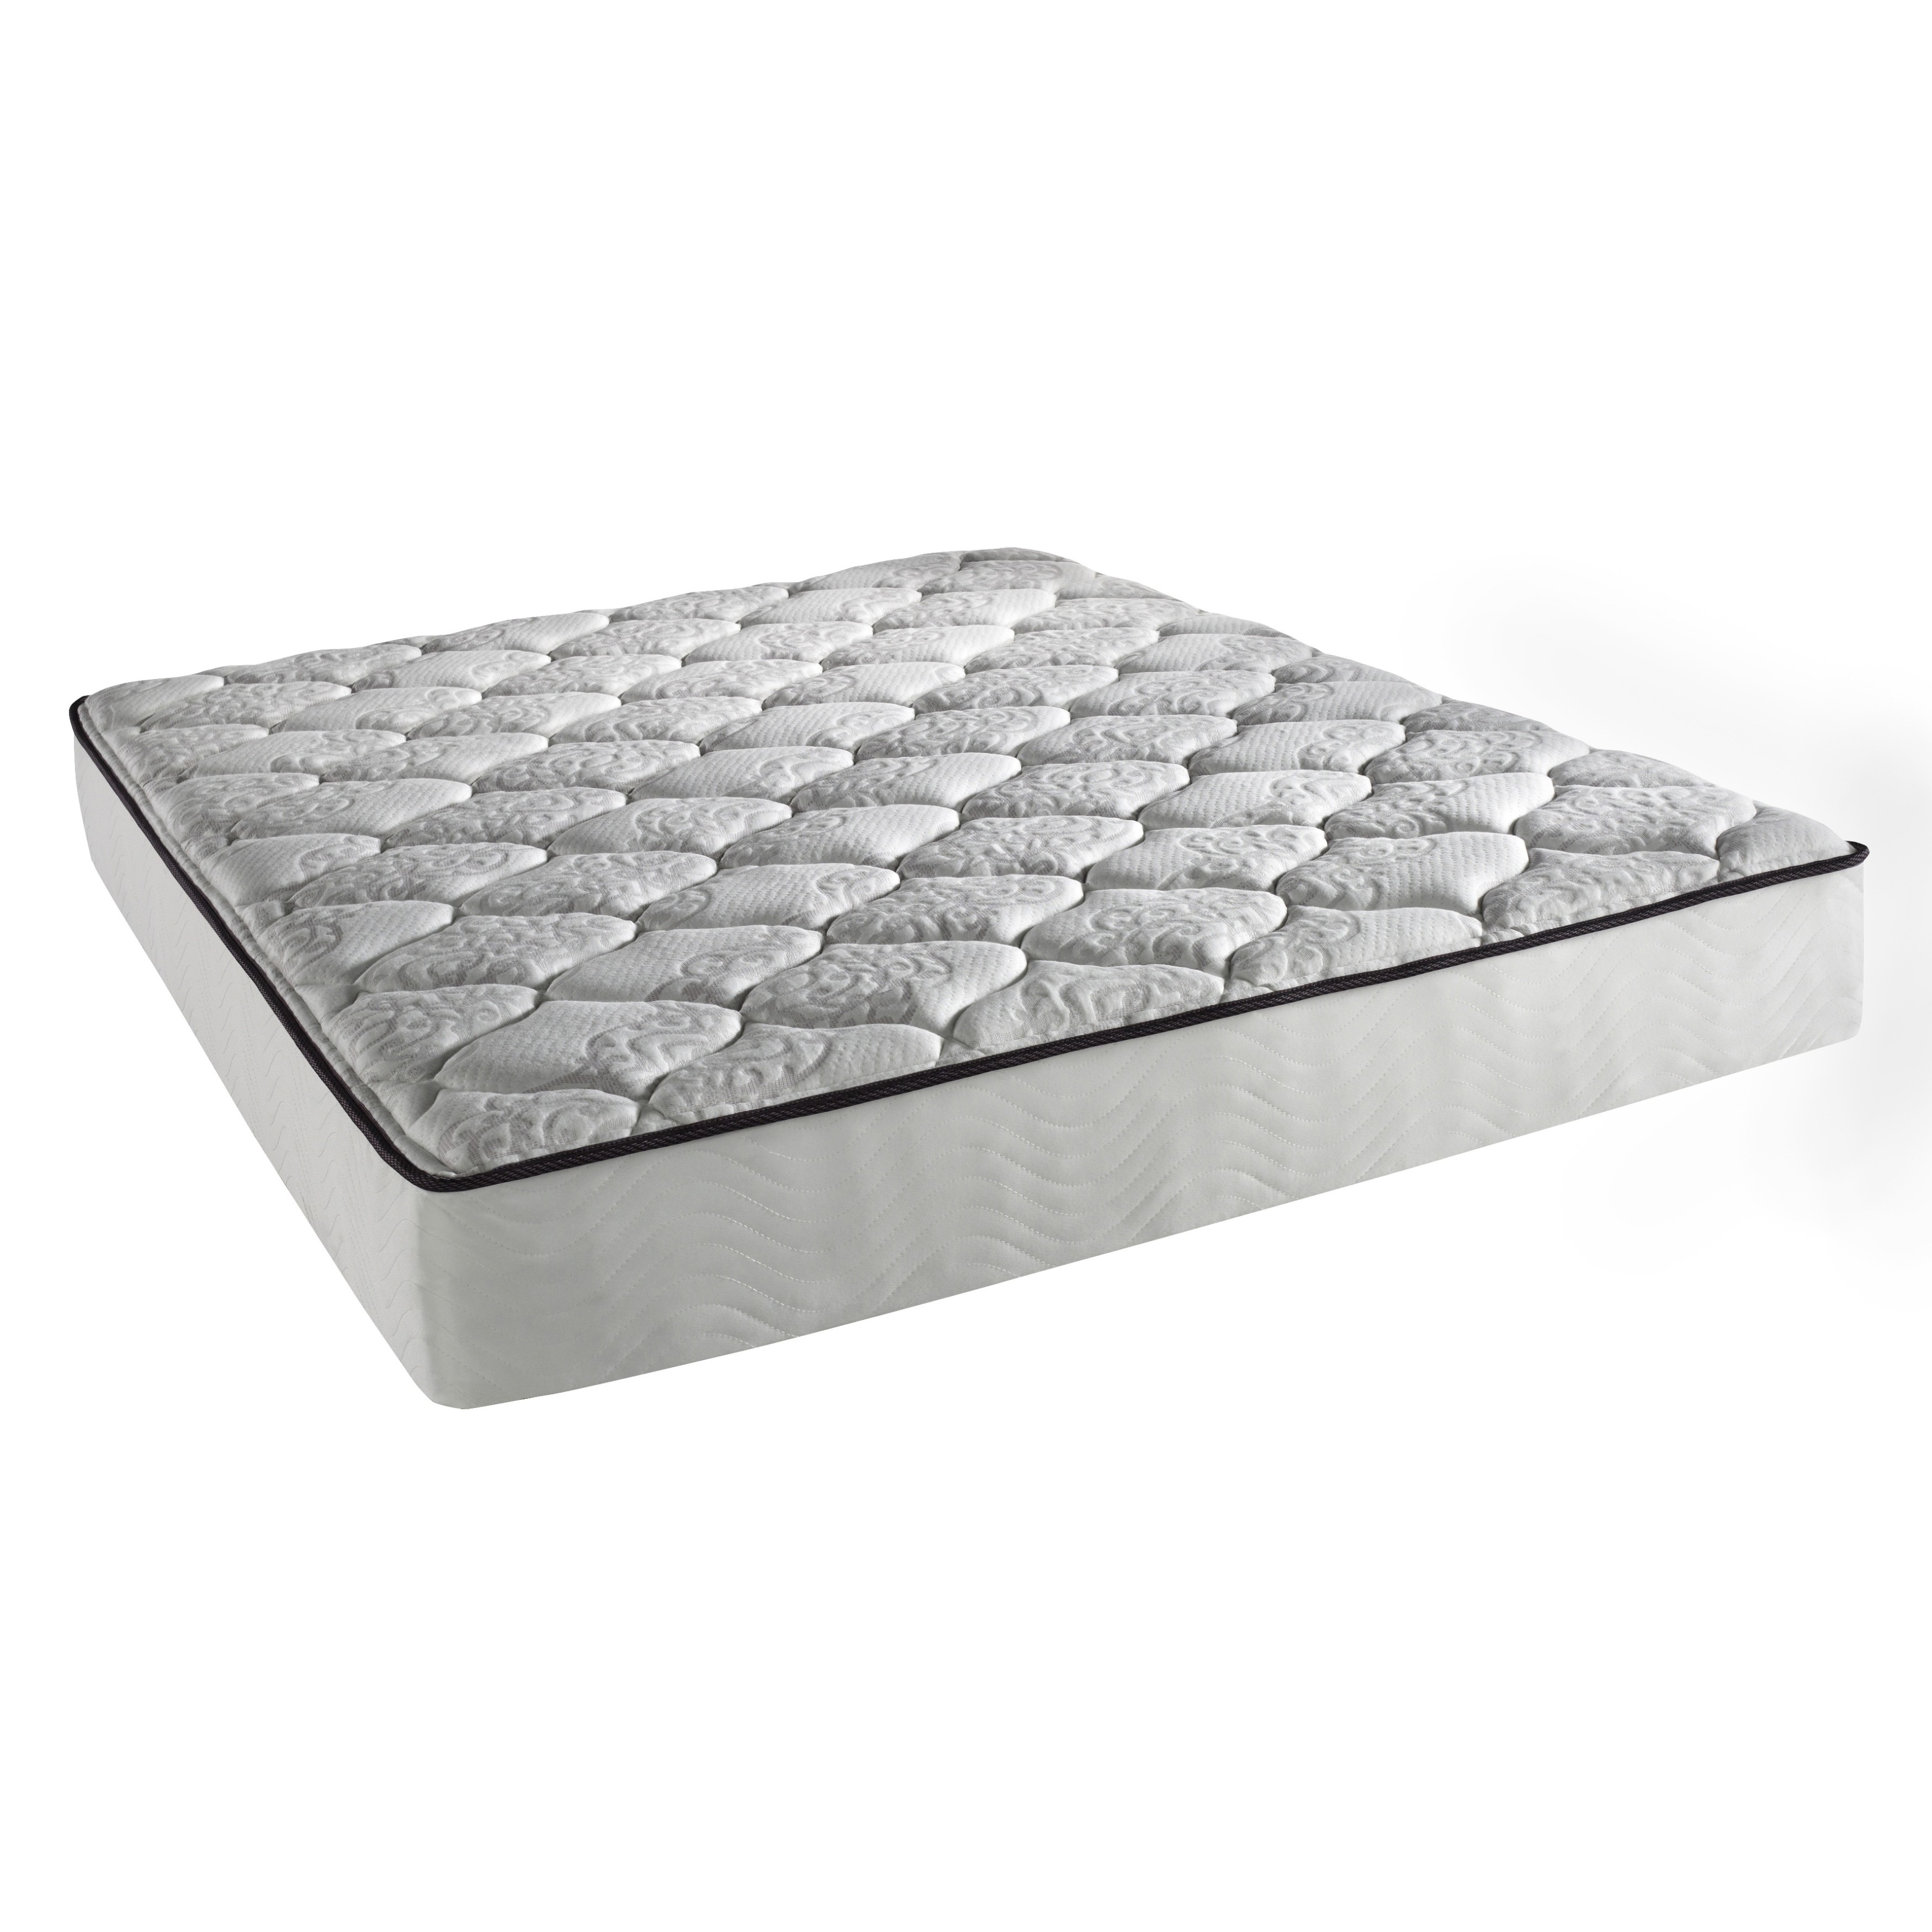 Beautyrest Elements Plush 11 inch Pocketed Coil Full size Mattress